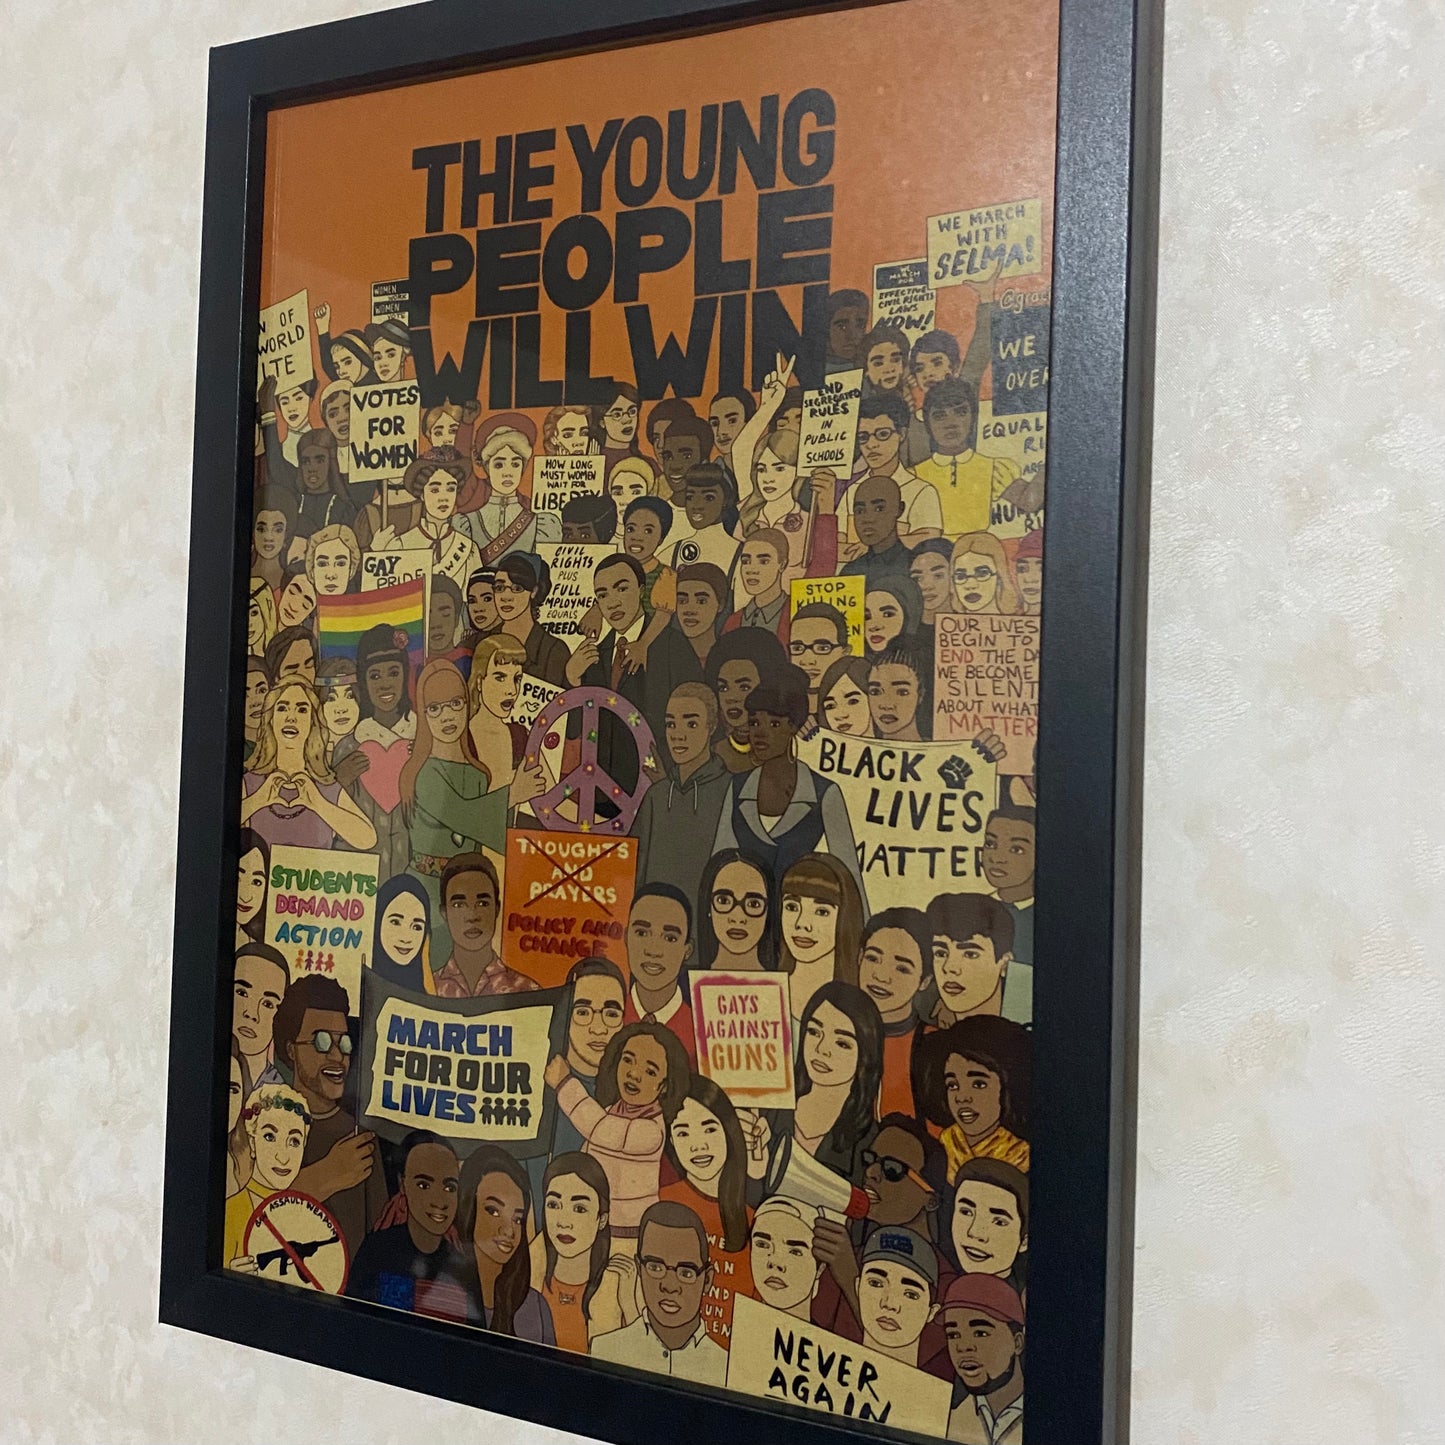 The Young People Will Win